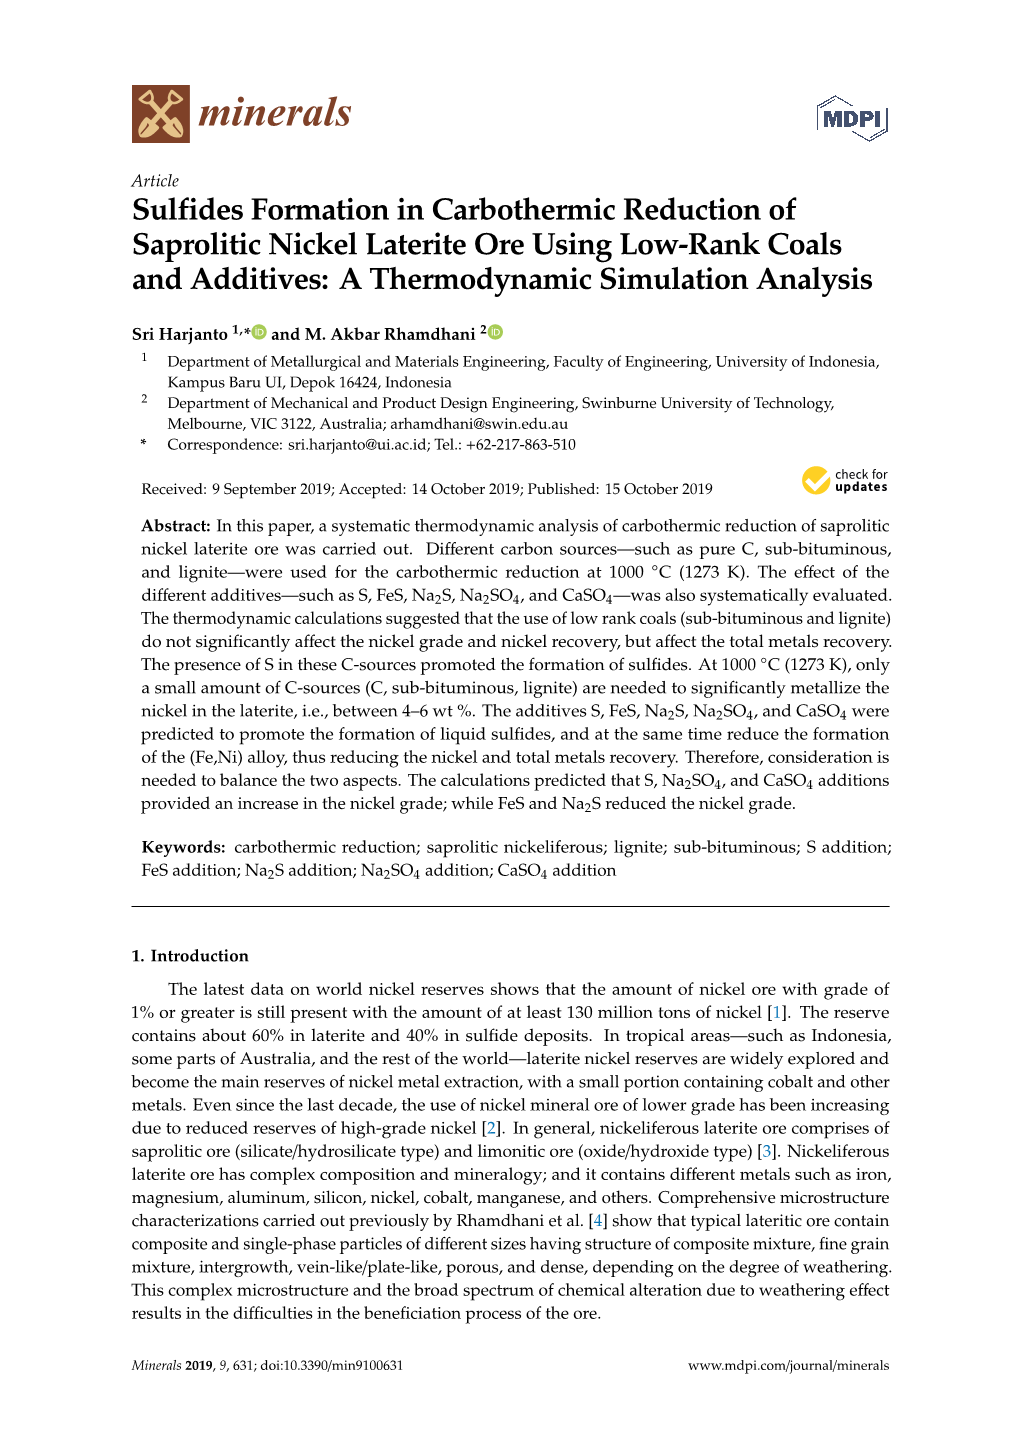 Sulfides Formation in Carbothermic Reduction of Saprolitic Nickel Laterite Ore Using Low-Rank Coals and Additives: a Thermodynamic Simulation Analysis